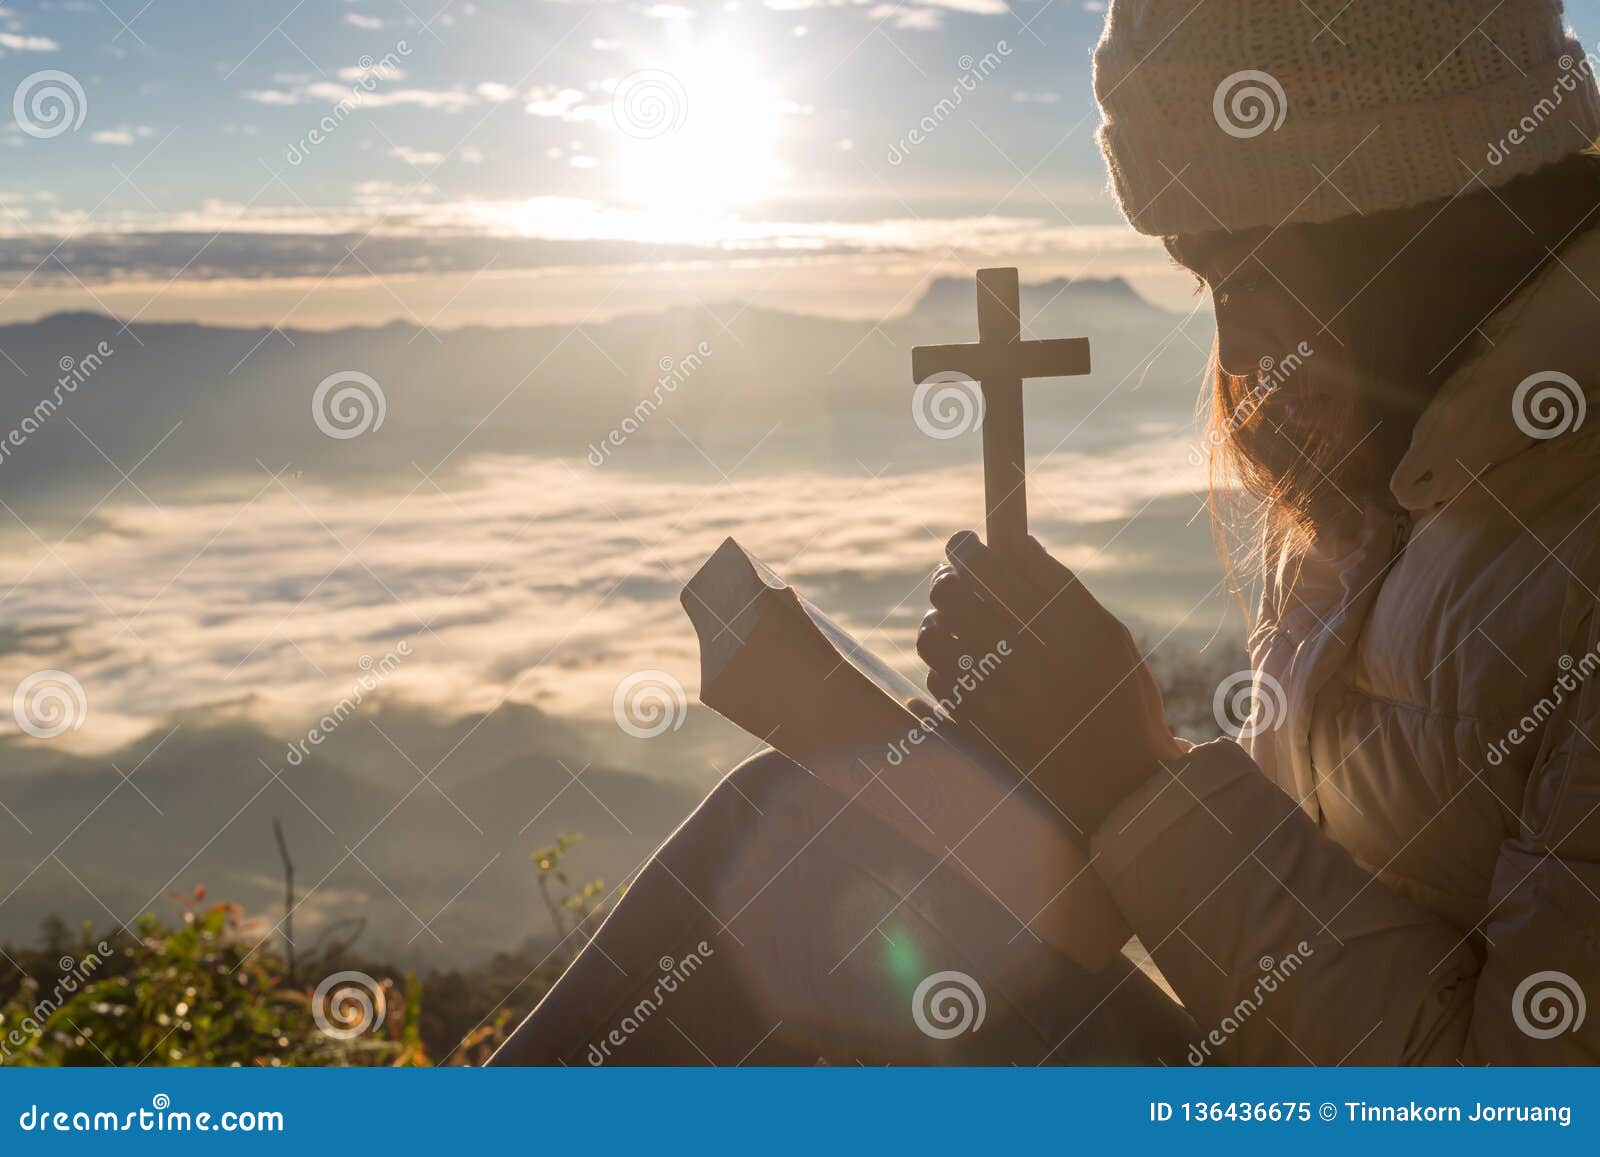 women pray to god with the cross on the mountain background with morning sunrise. woman pray for god blessing to wishing have a